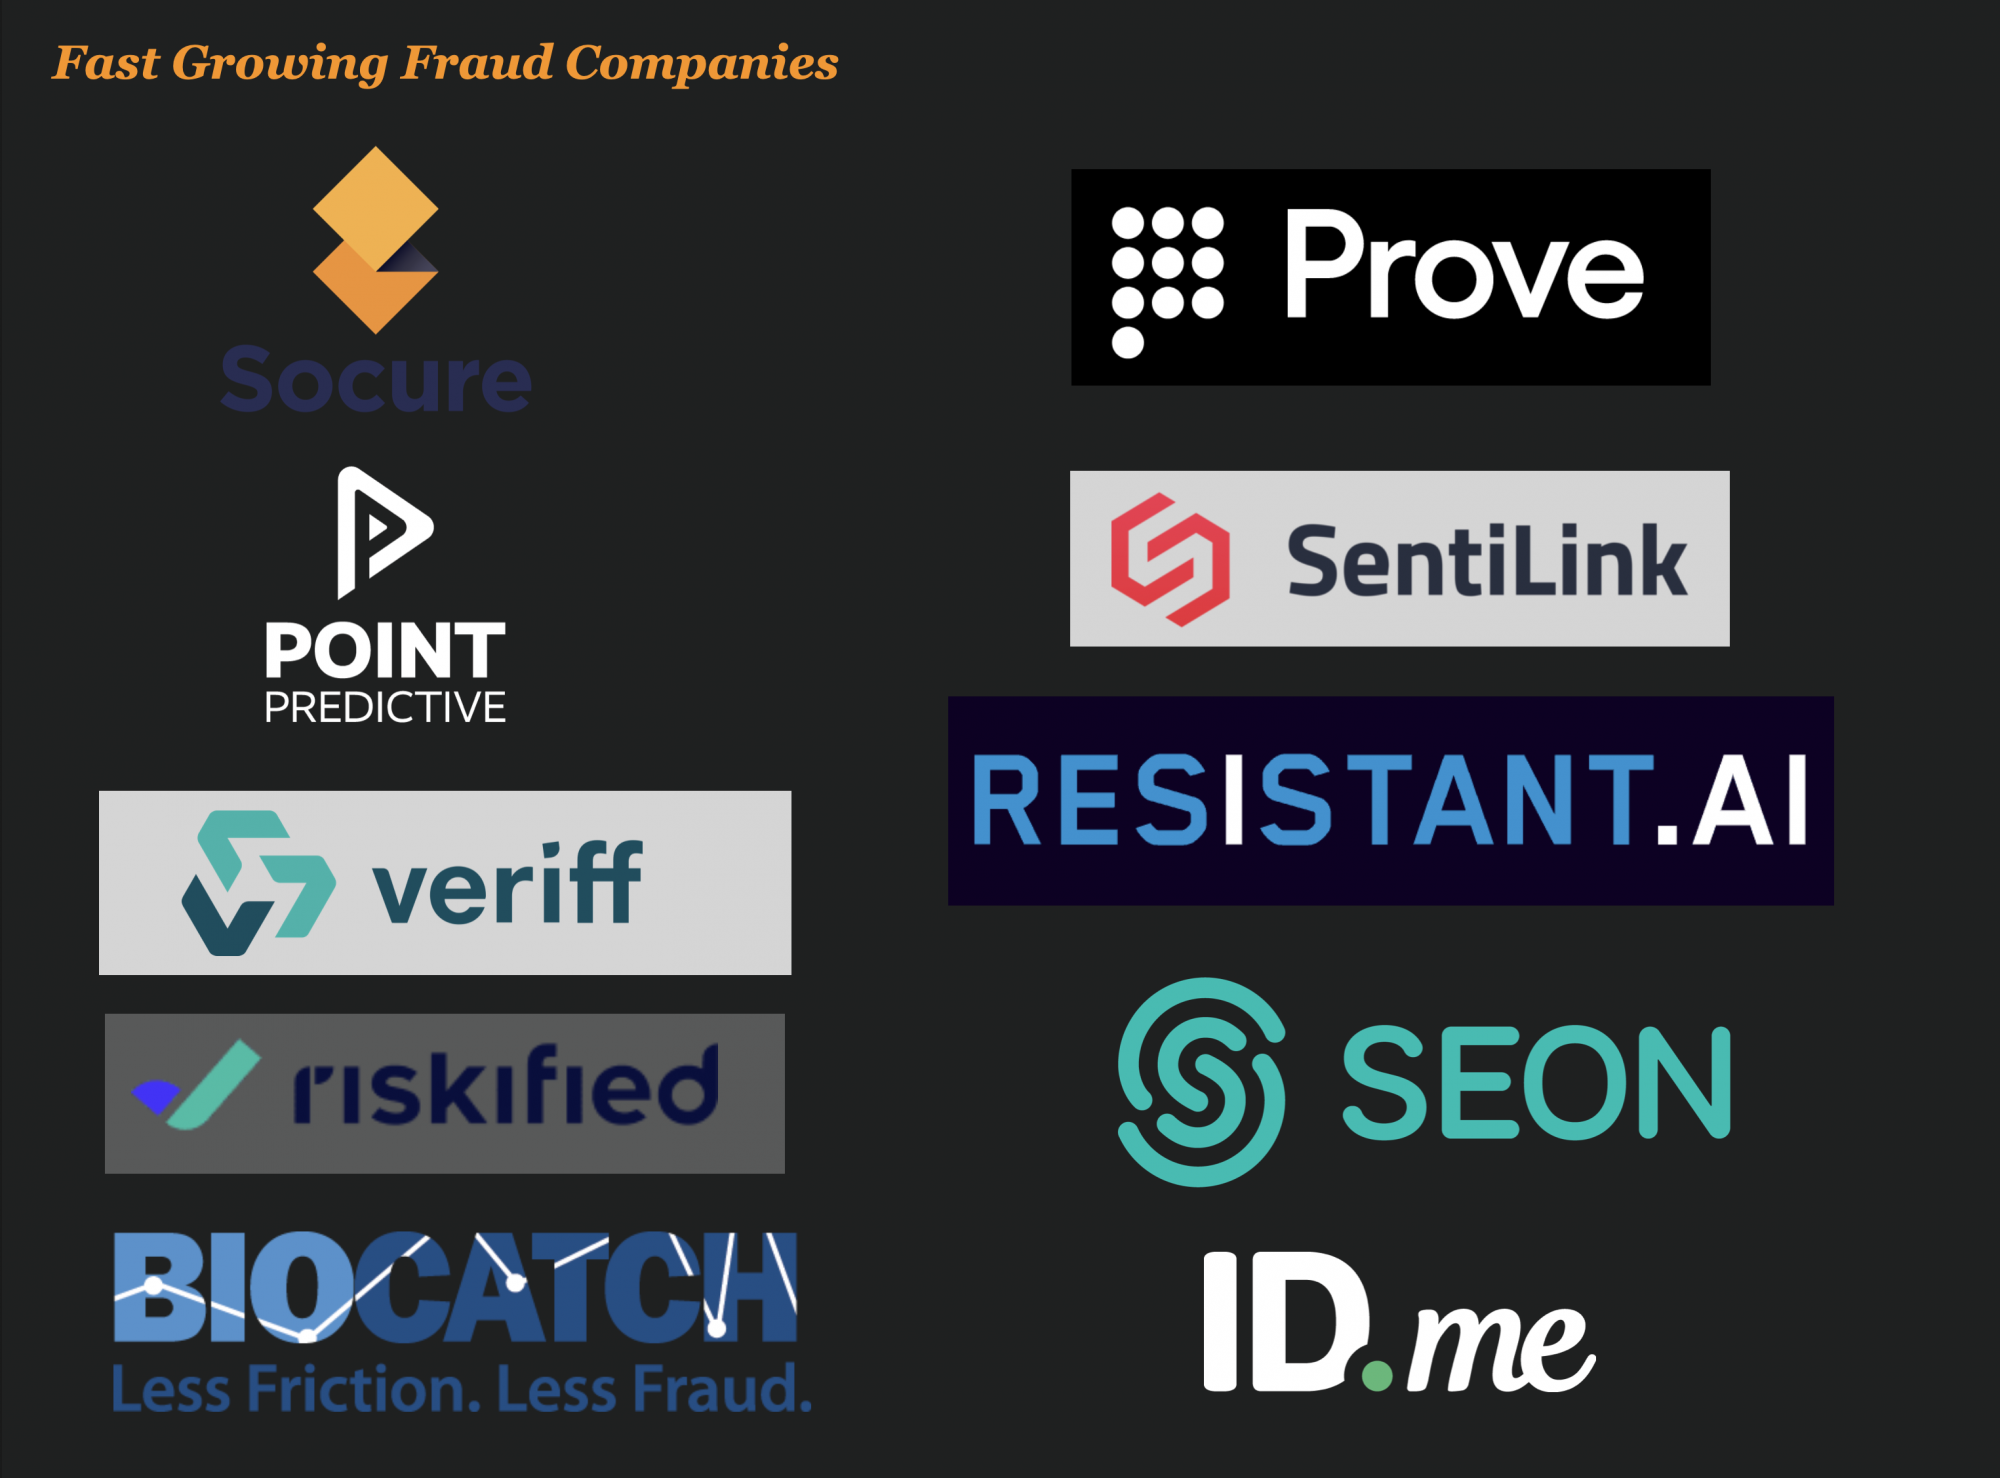 #6 – Amazing Fraud Companies Grew Quickly As Investment In Fraud Technology Hit New Heights